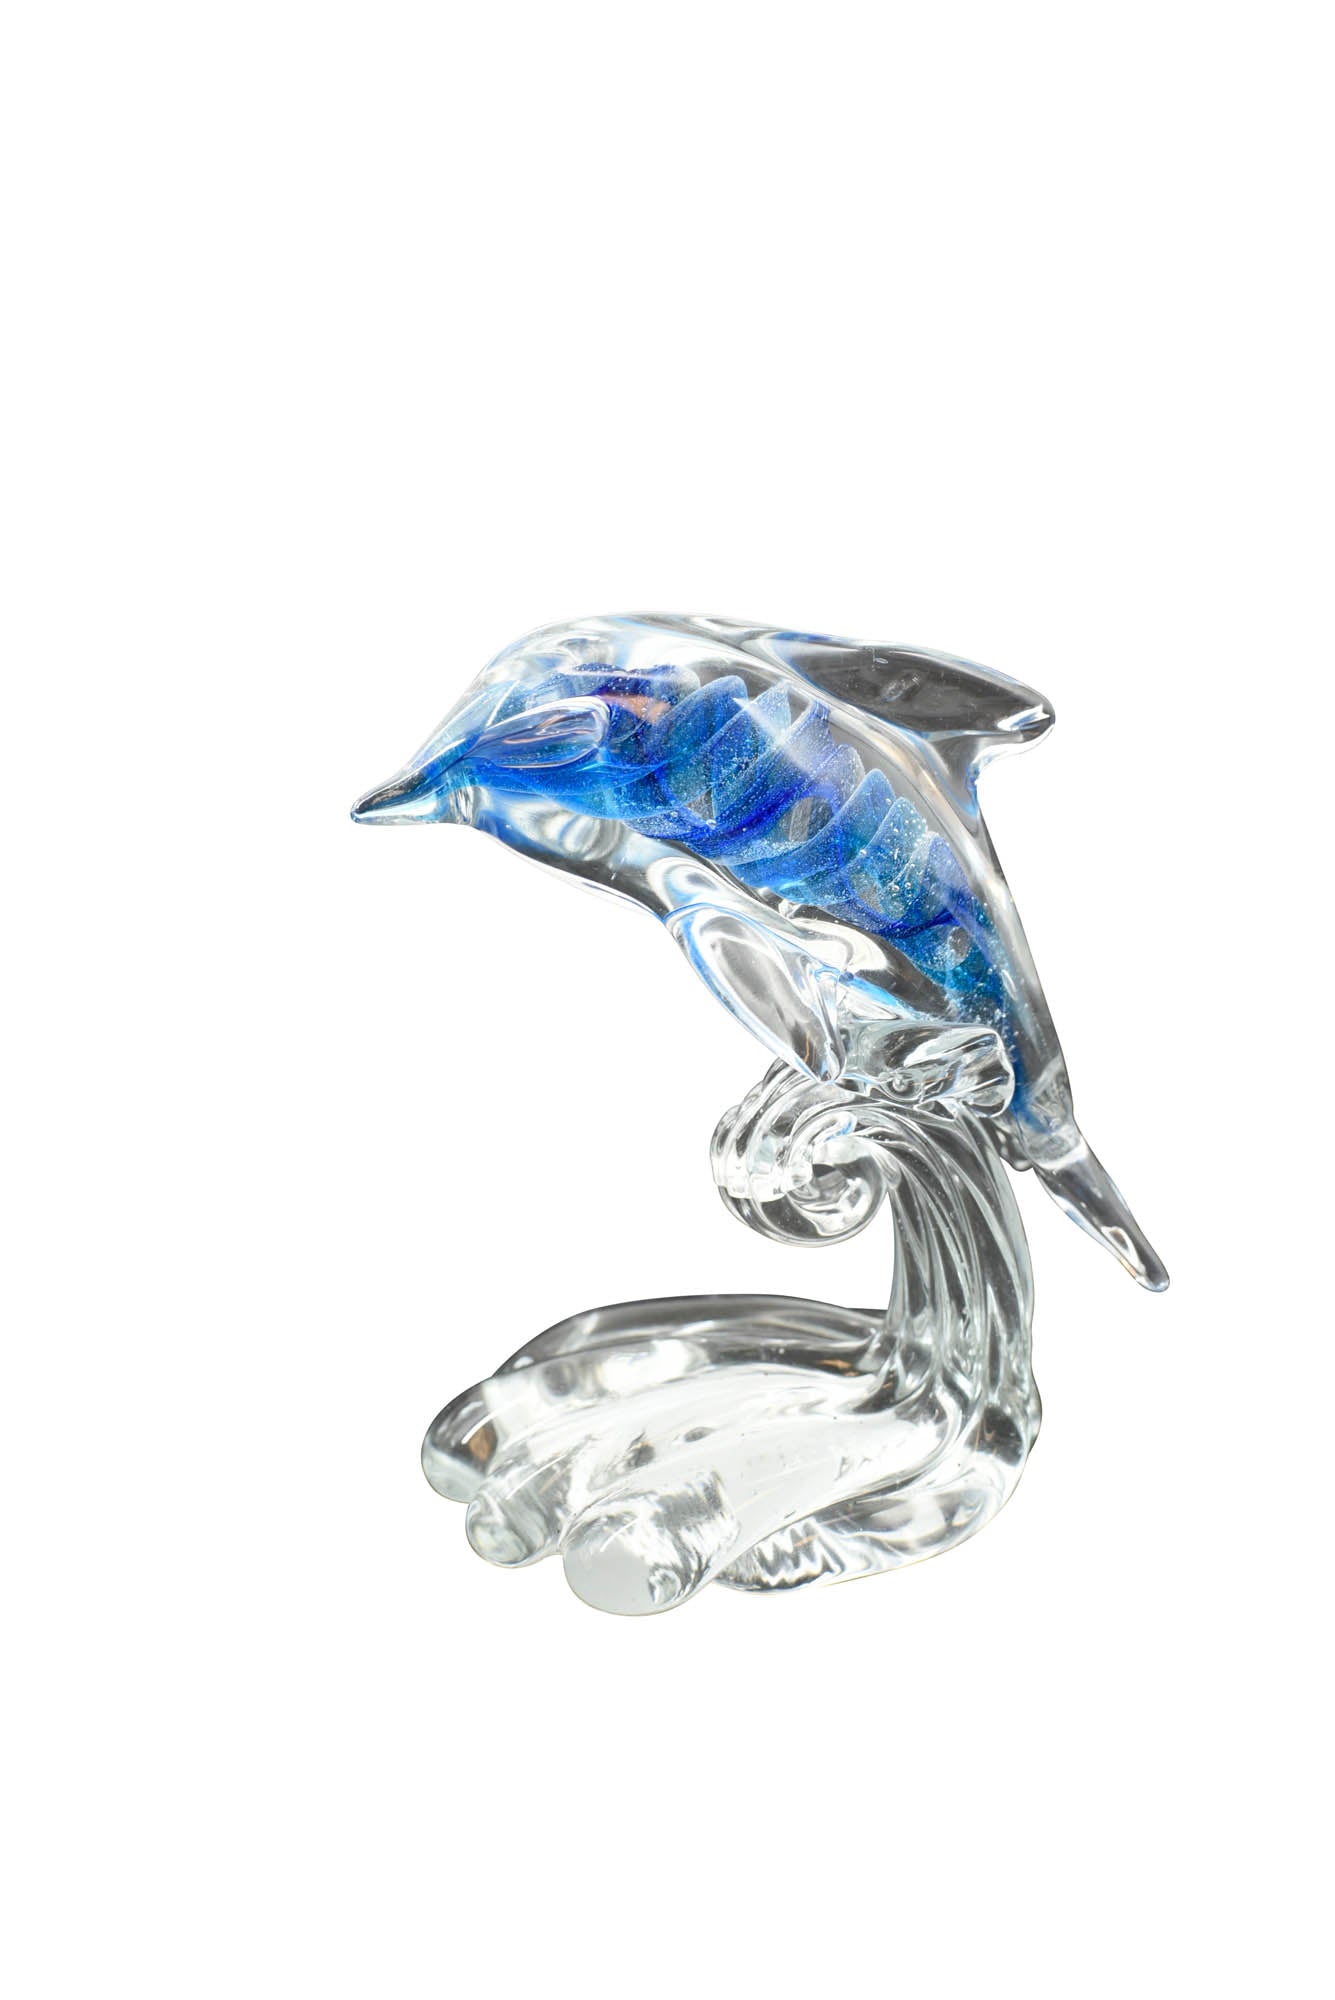 Glass Art - Blue Glass Dolphin on Wave